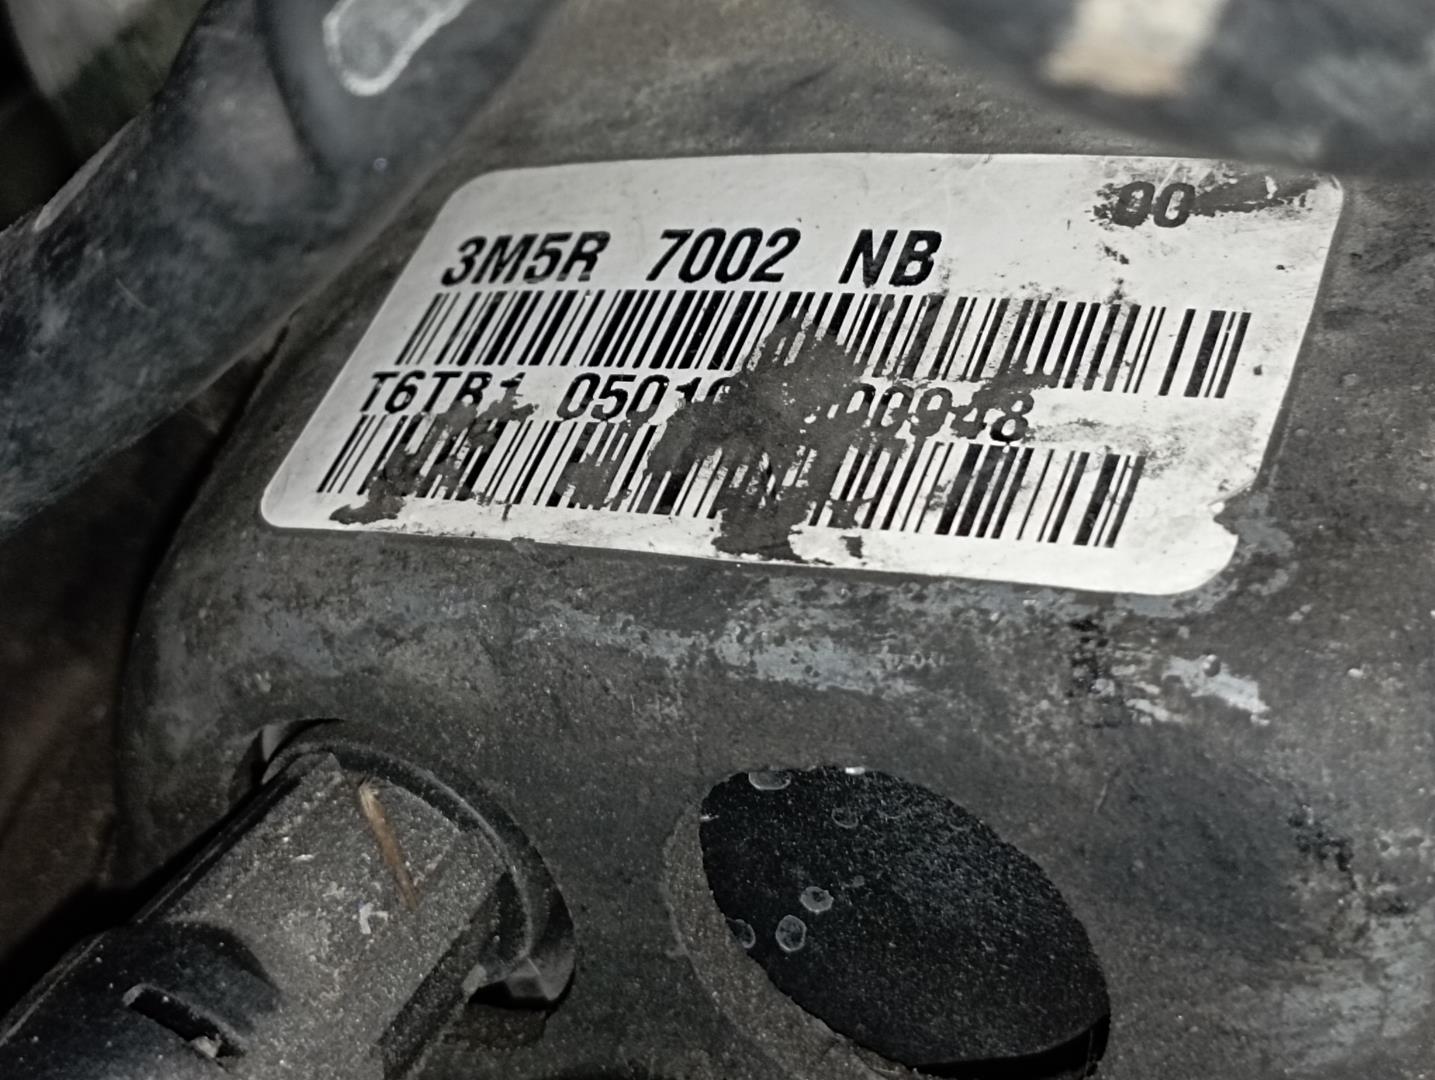 FORD C-Max 1 generation (2003-2010) Gearbox 3M5R7002NB 18528419